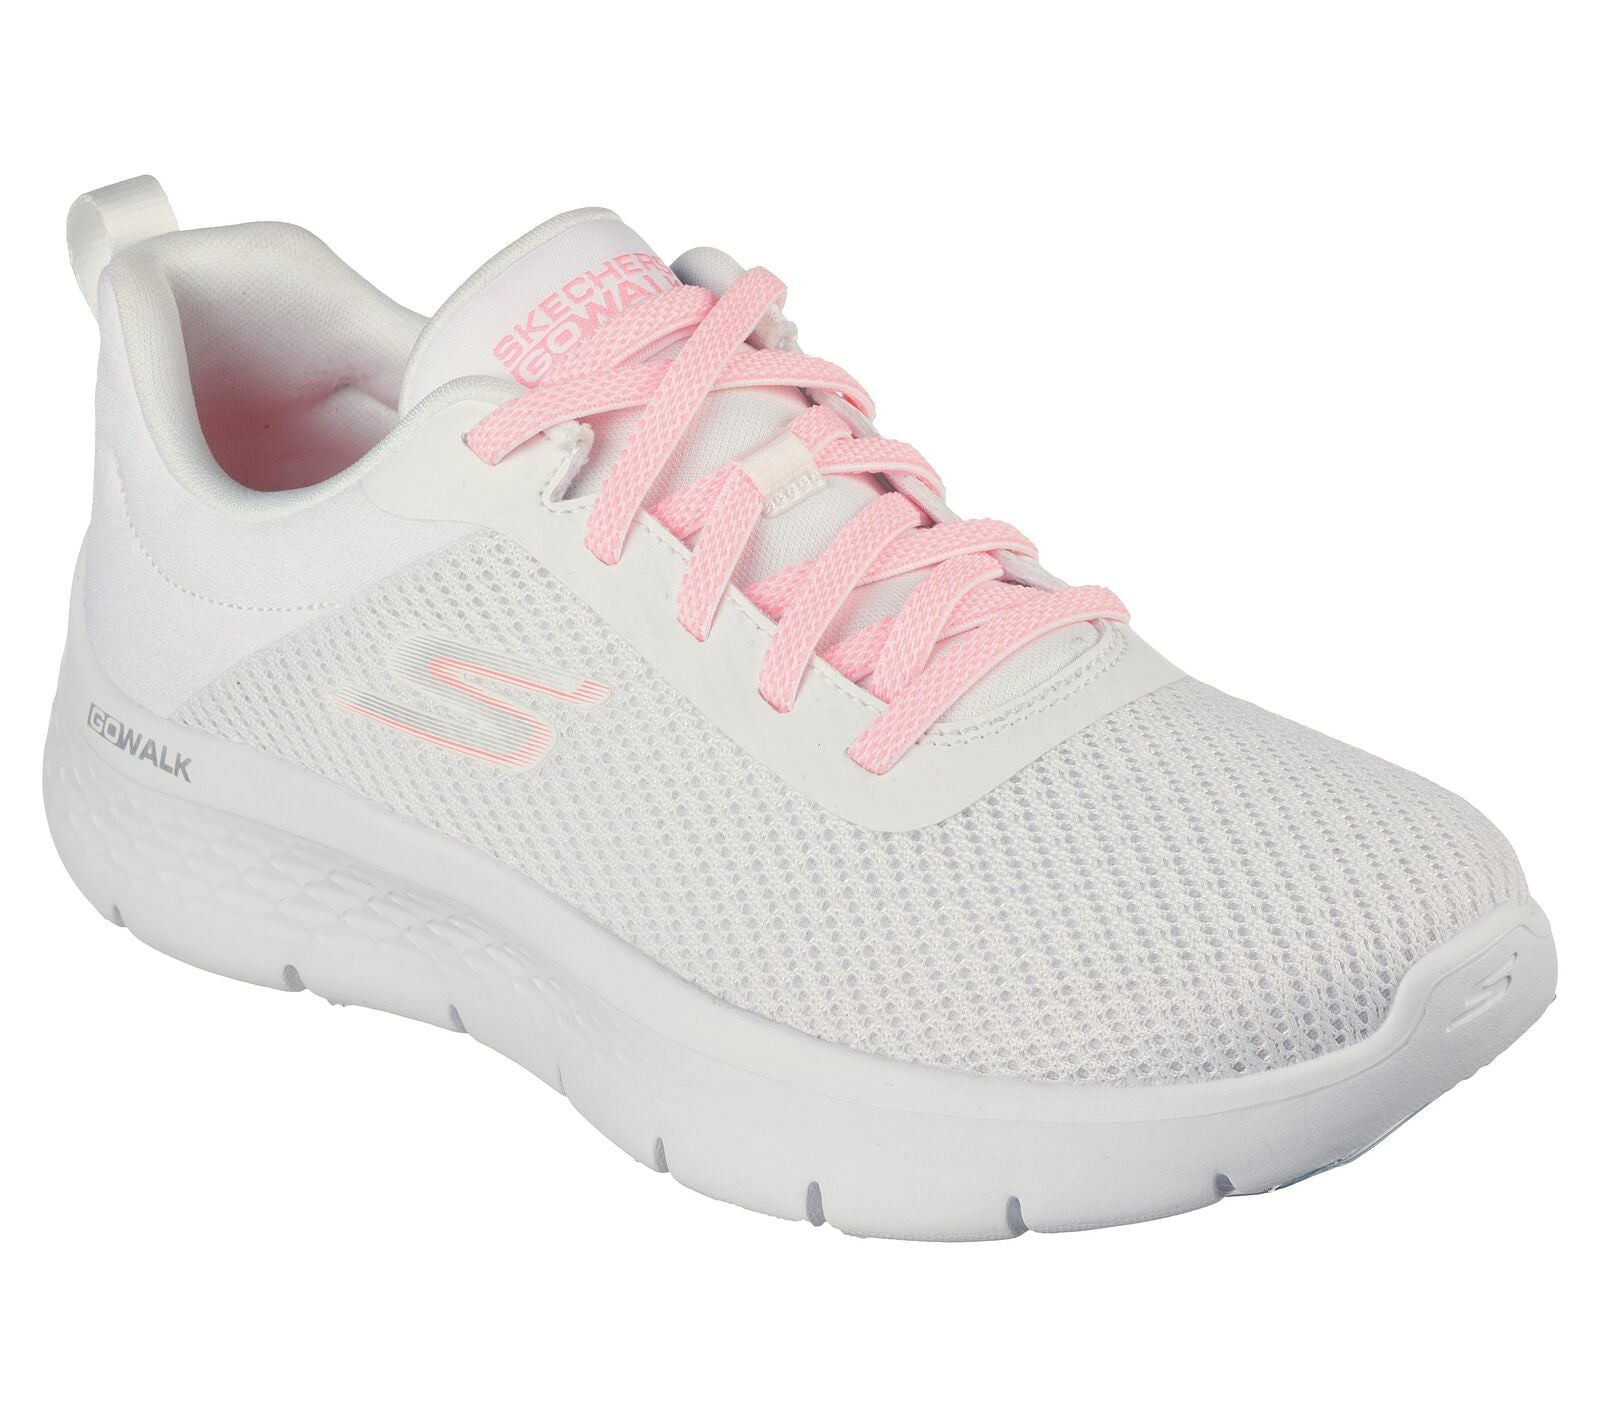 Skechers 124952 Go Walk Flex Alani Ladies White And Pink Textile Elasticated Trainers